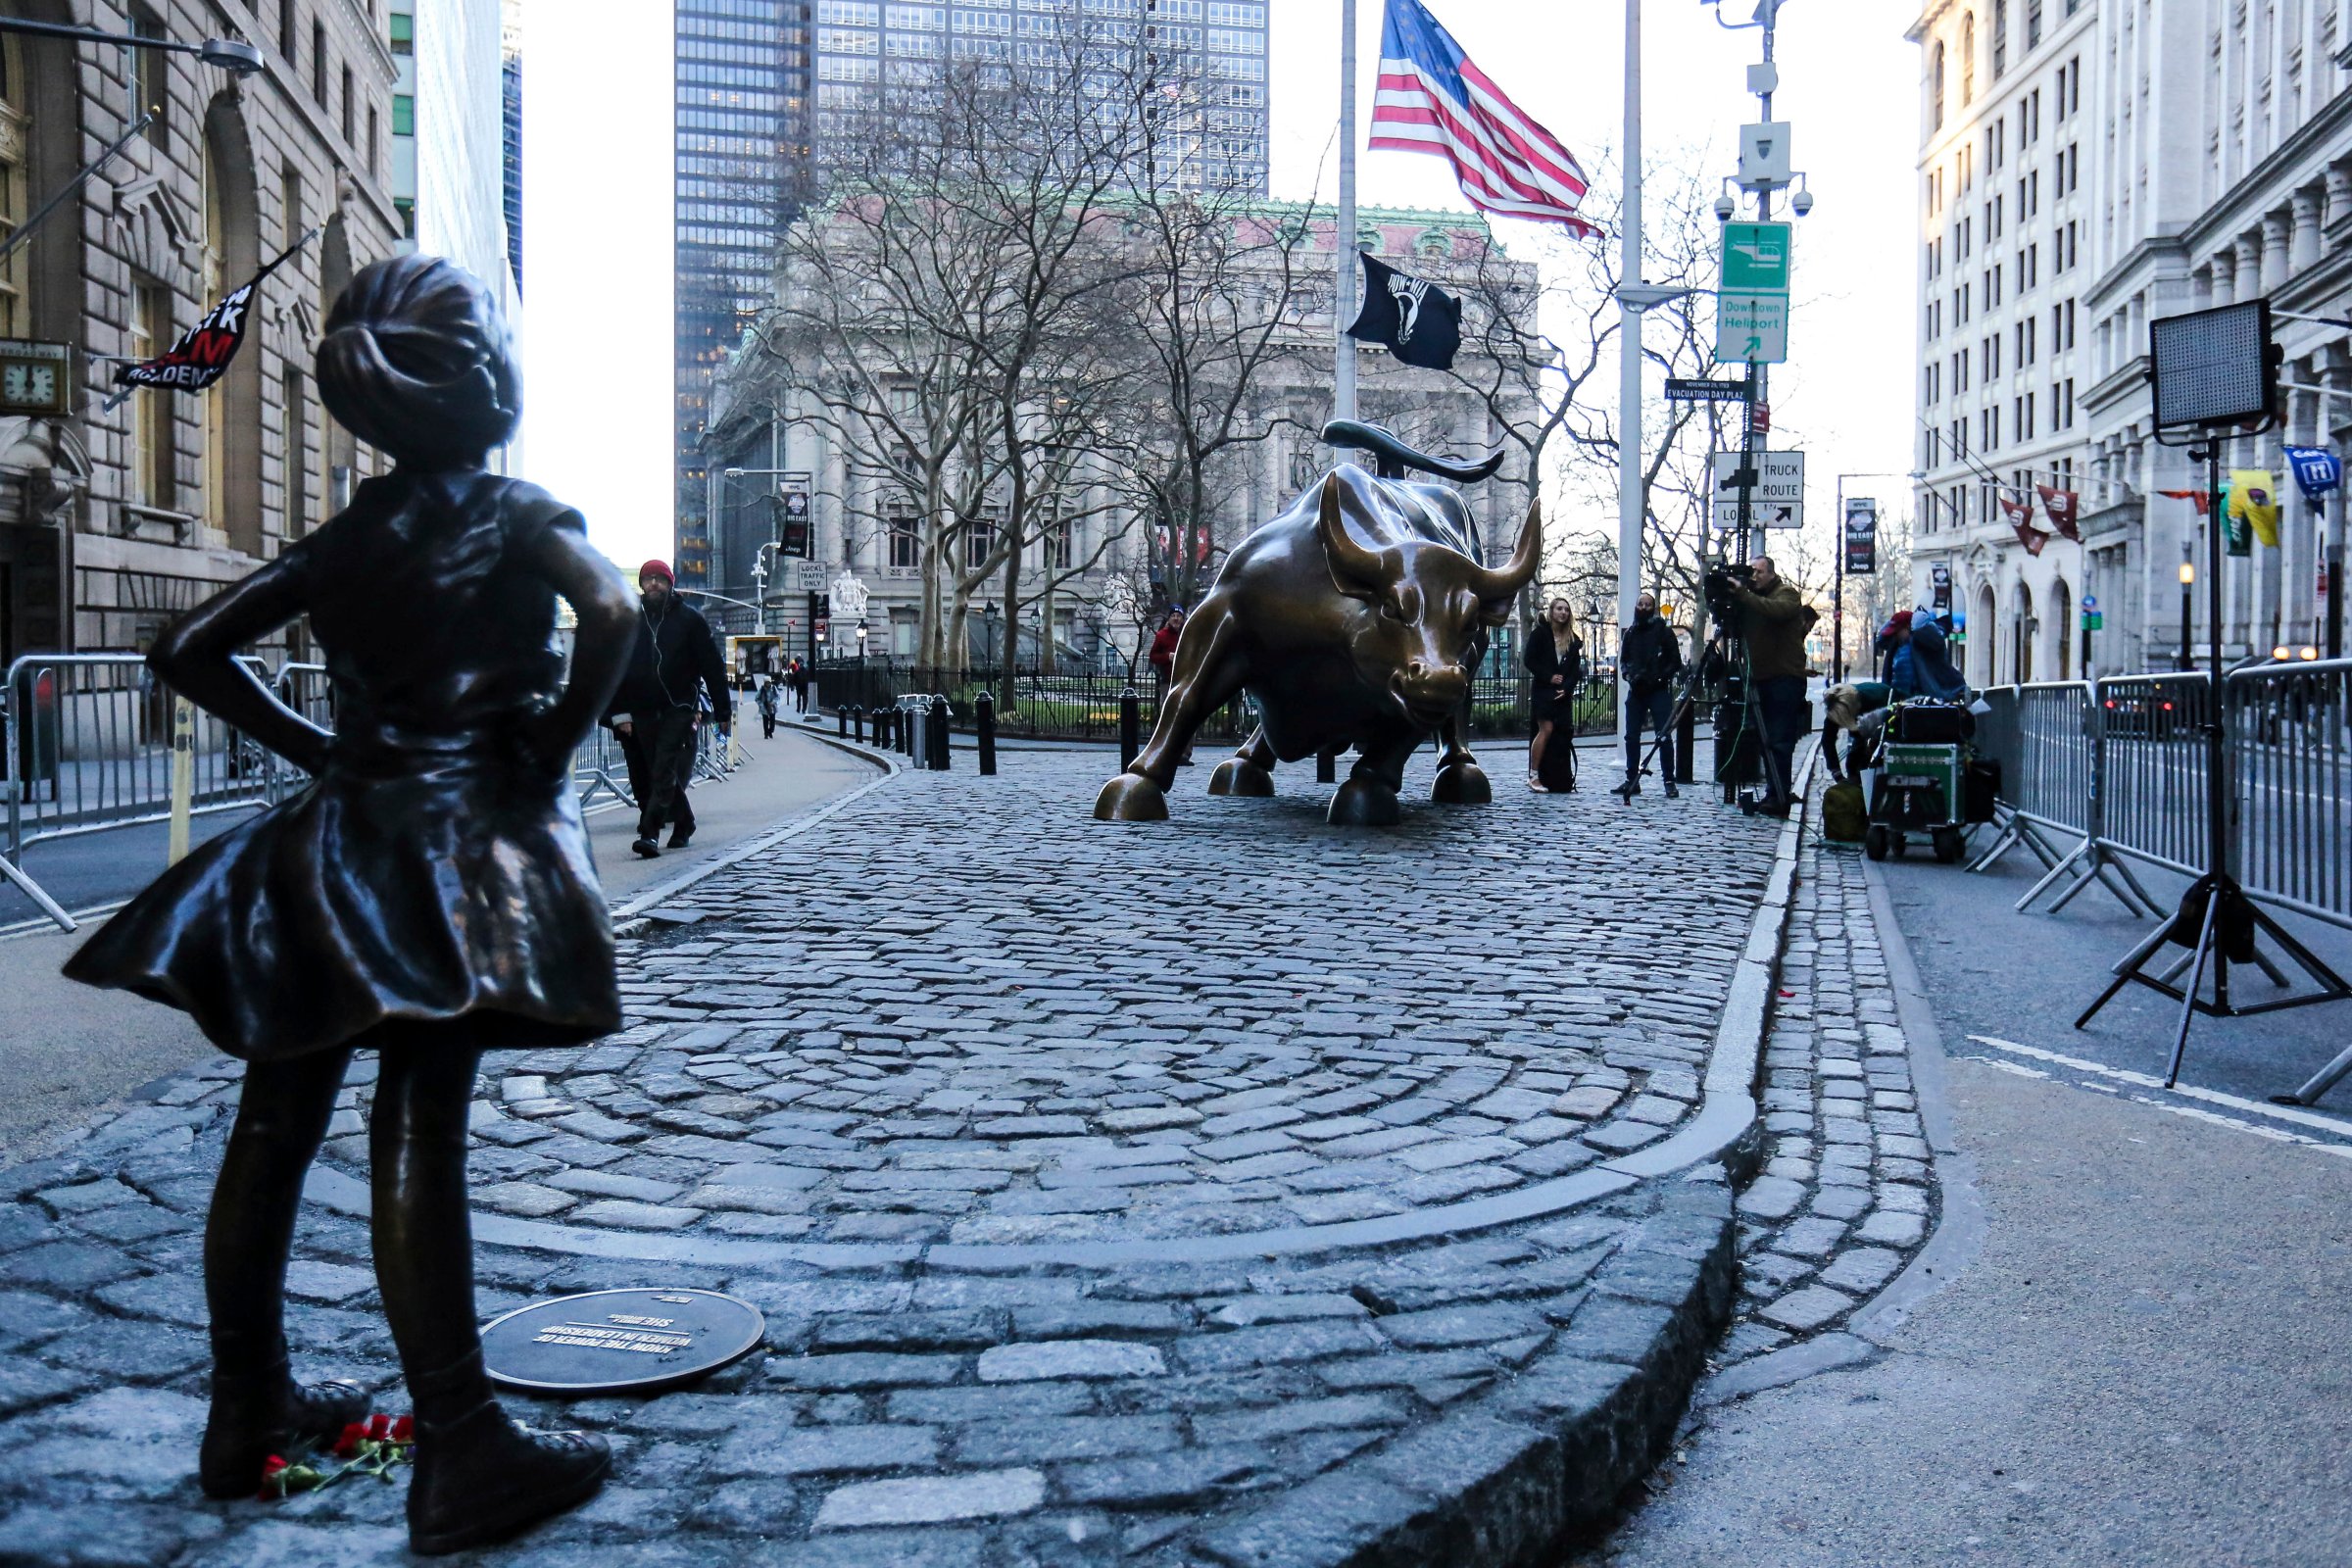 'The Fearless Girl' Statue in New York